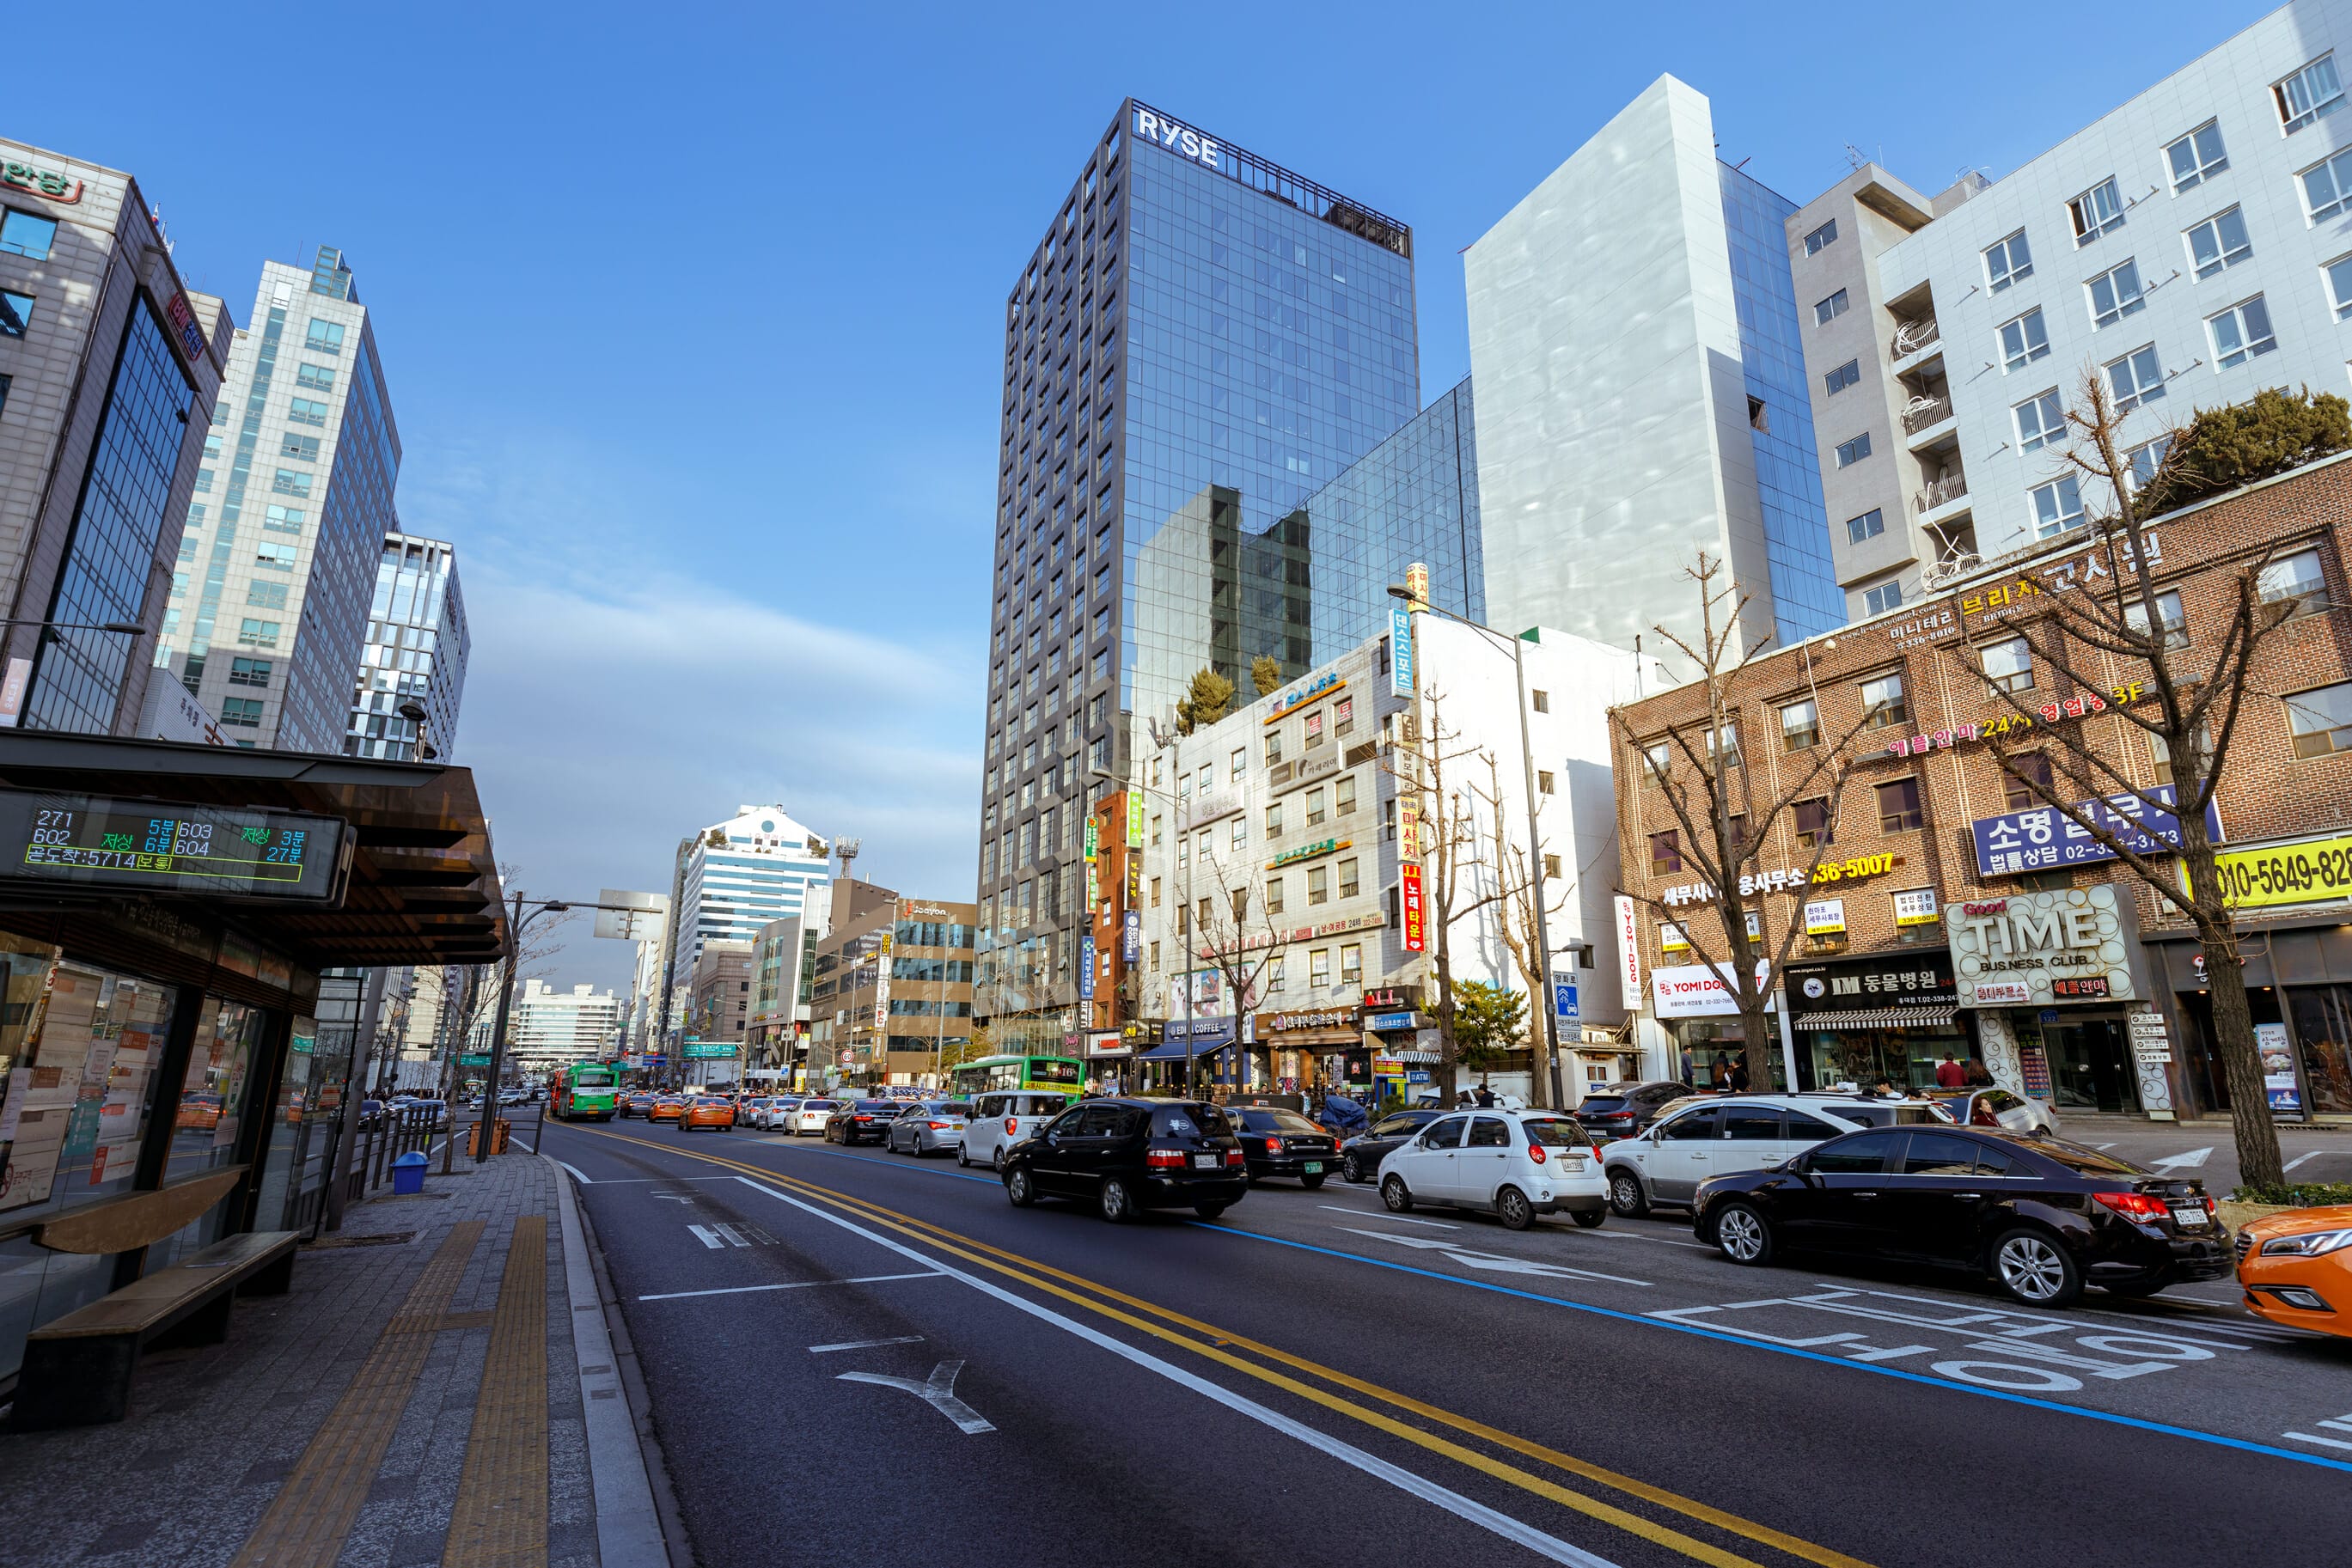 16 Overlooked Neighbourhoods in Seoul - How Many Have You Visited? 9